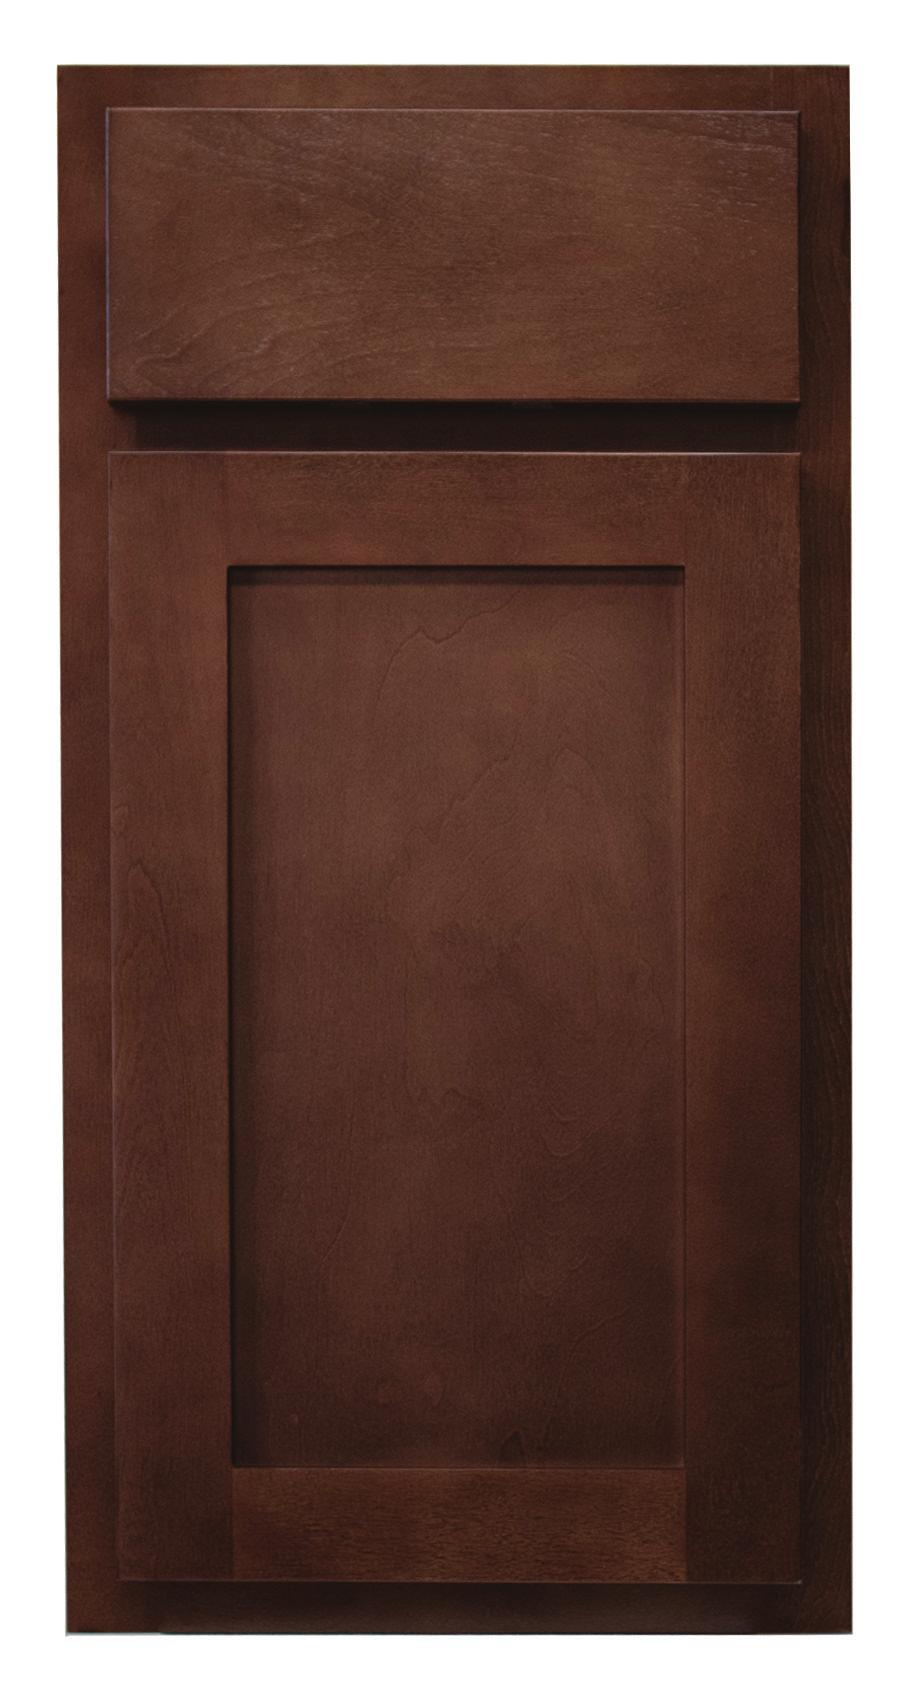 panel Espresso stain 5 1/2 NEW Lexington Order Code: Partial overlay door style Hardwood species Solid wood mortis and tenon stile and